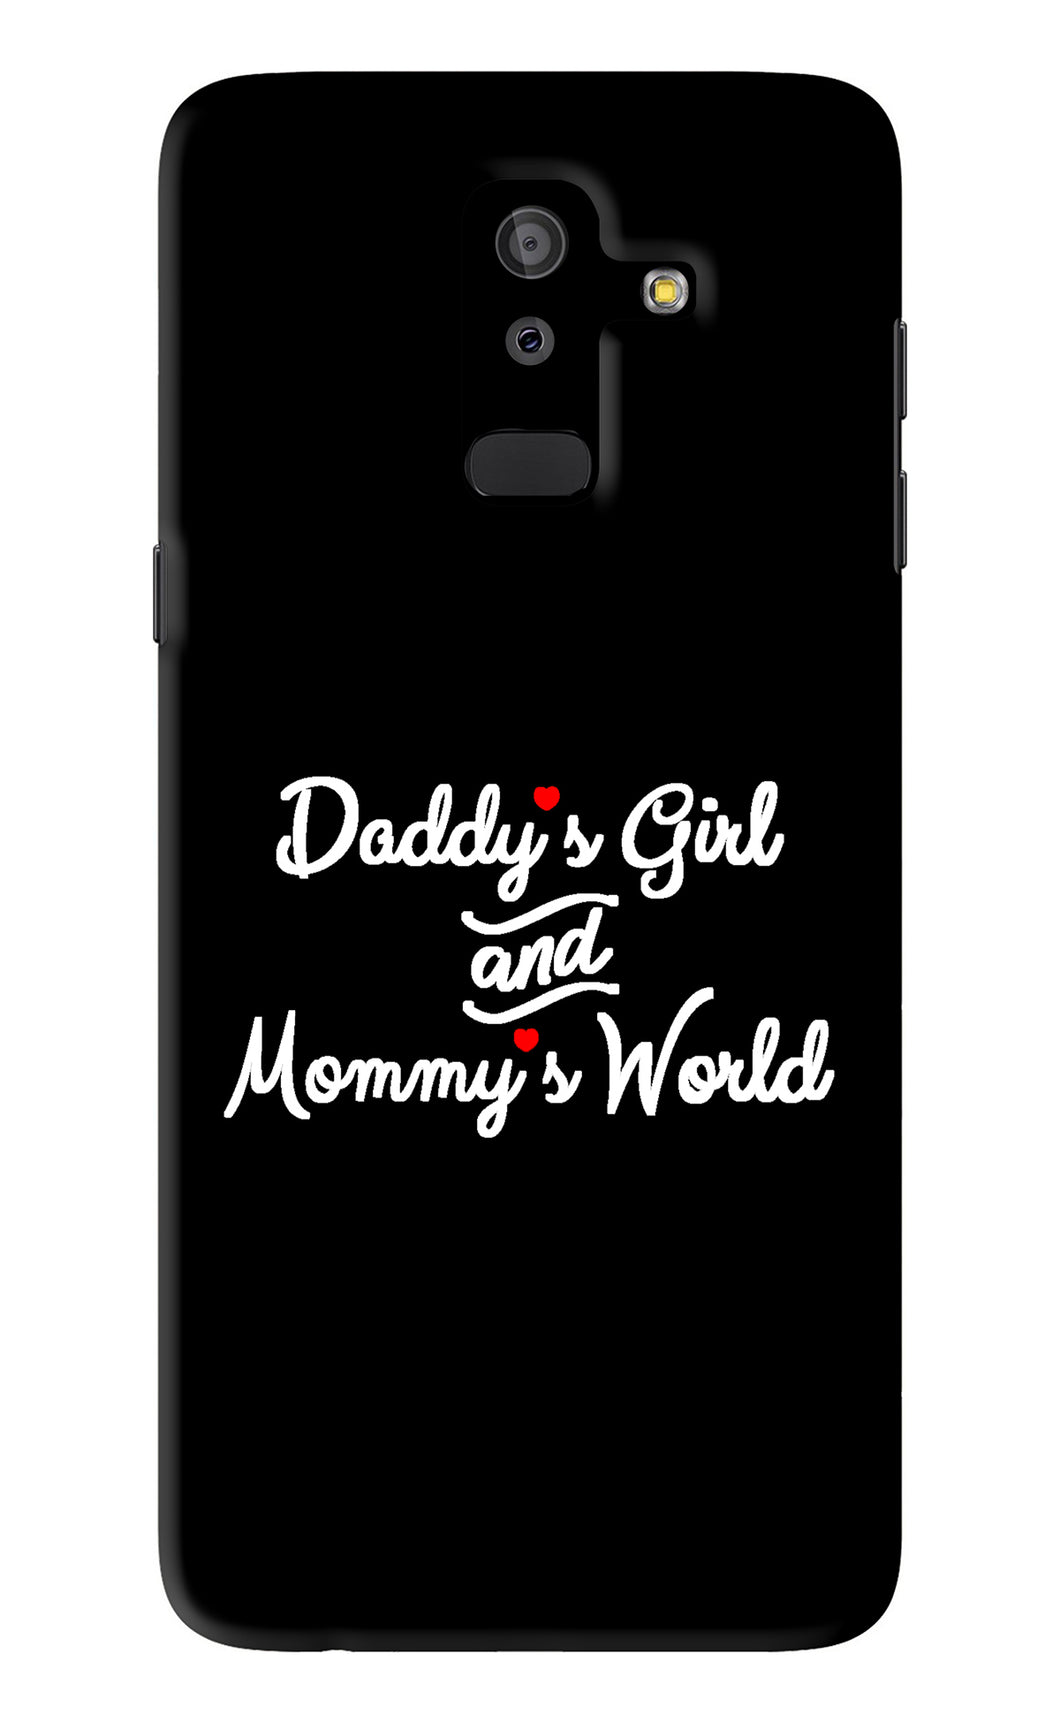 Daddy's Girl and Mommy's World Samsung Galaxy J8 2018 Back Skin Wrap